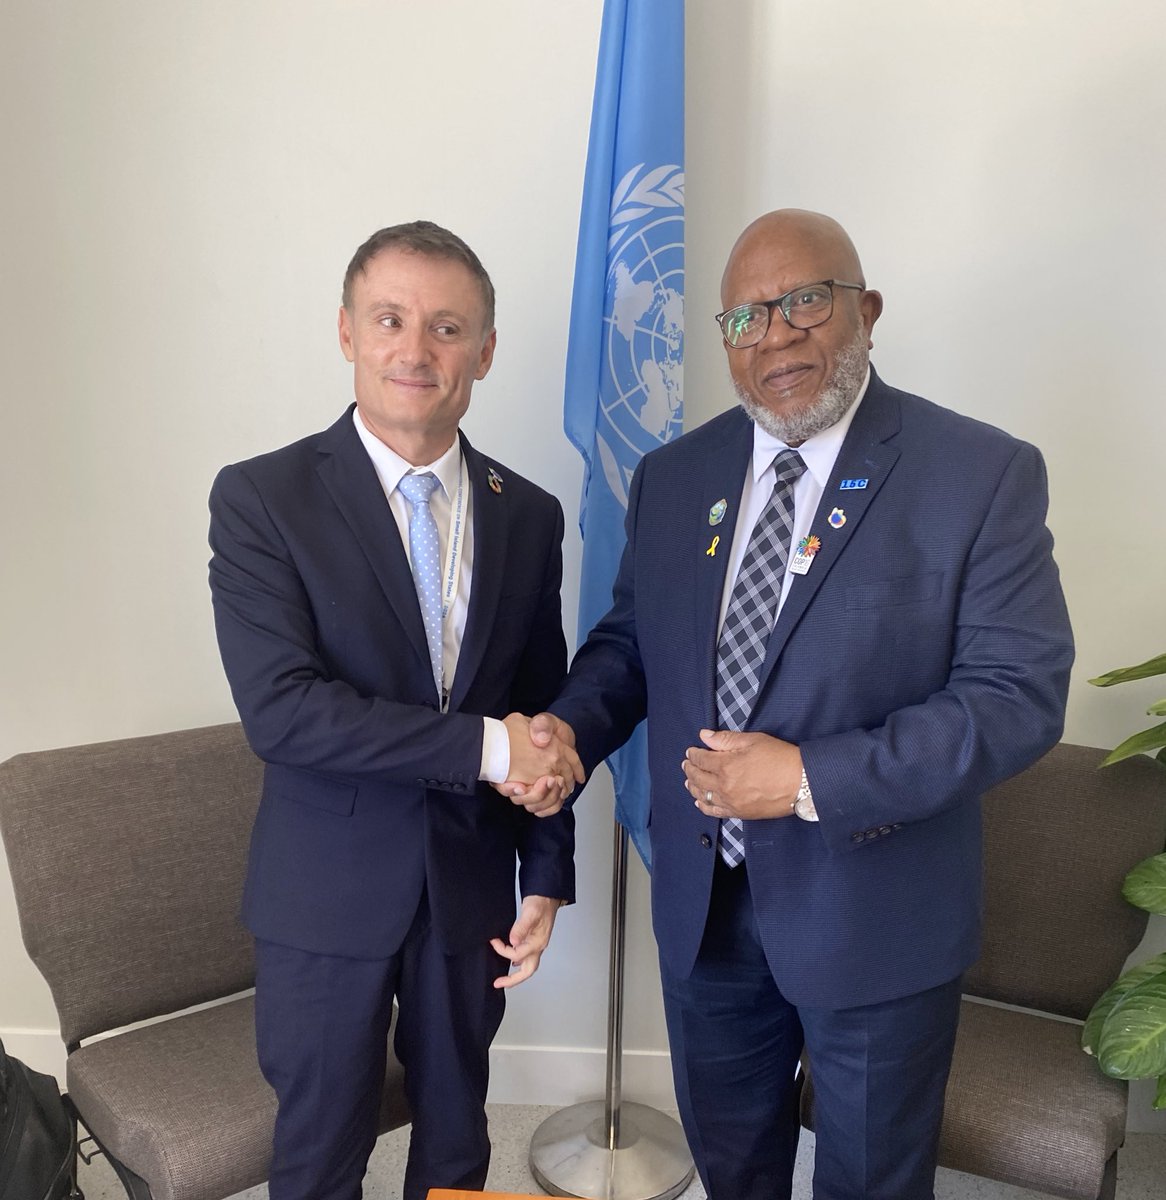 A pleasure meeting the UN Resident Coordinator for Barbados and the Eastern Caribbean, Didier Trebucq, during #SIDS4. Our conversation centered on the importance of leveraging momentum from the Antigua and Barbuda Agenda for SIDS (ABAS) to accelerate progress in achieving